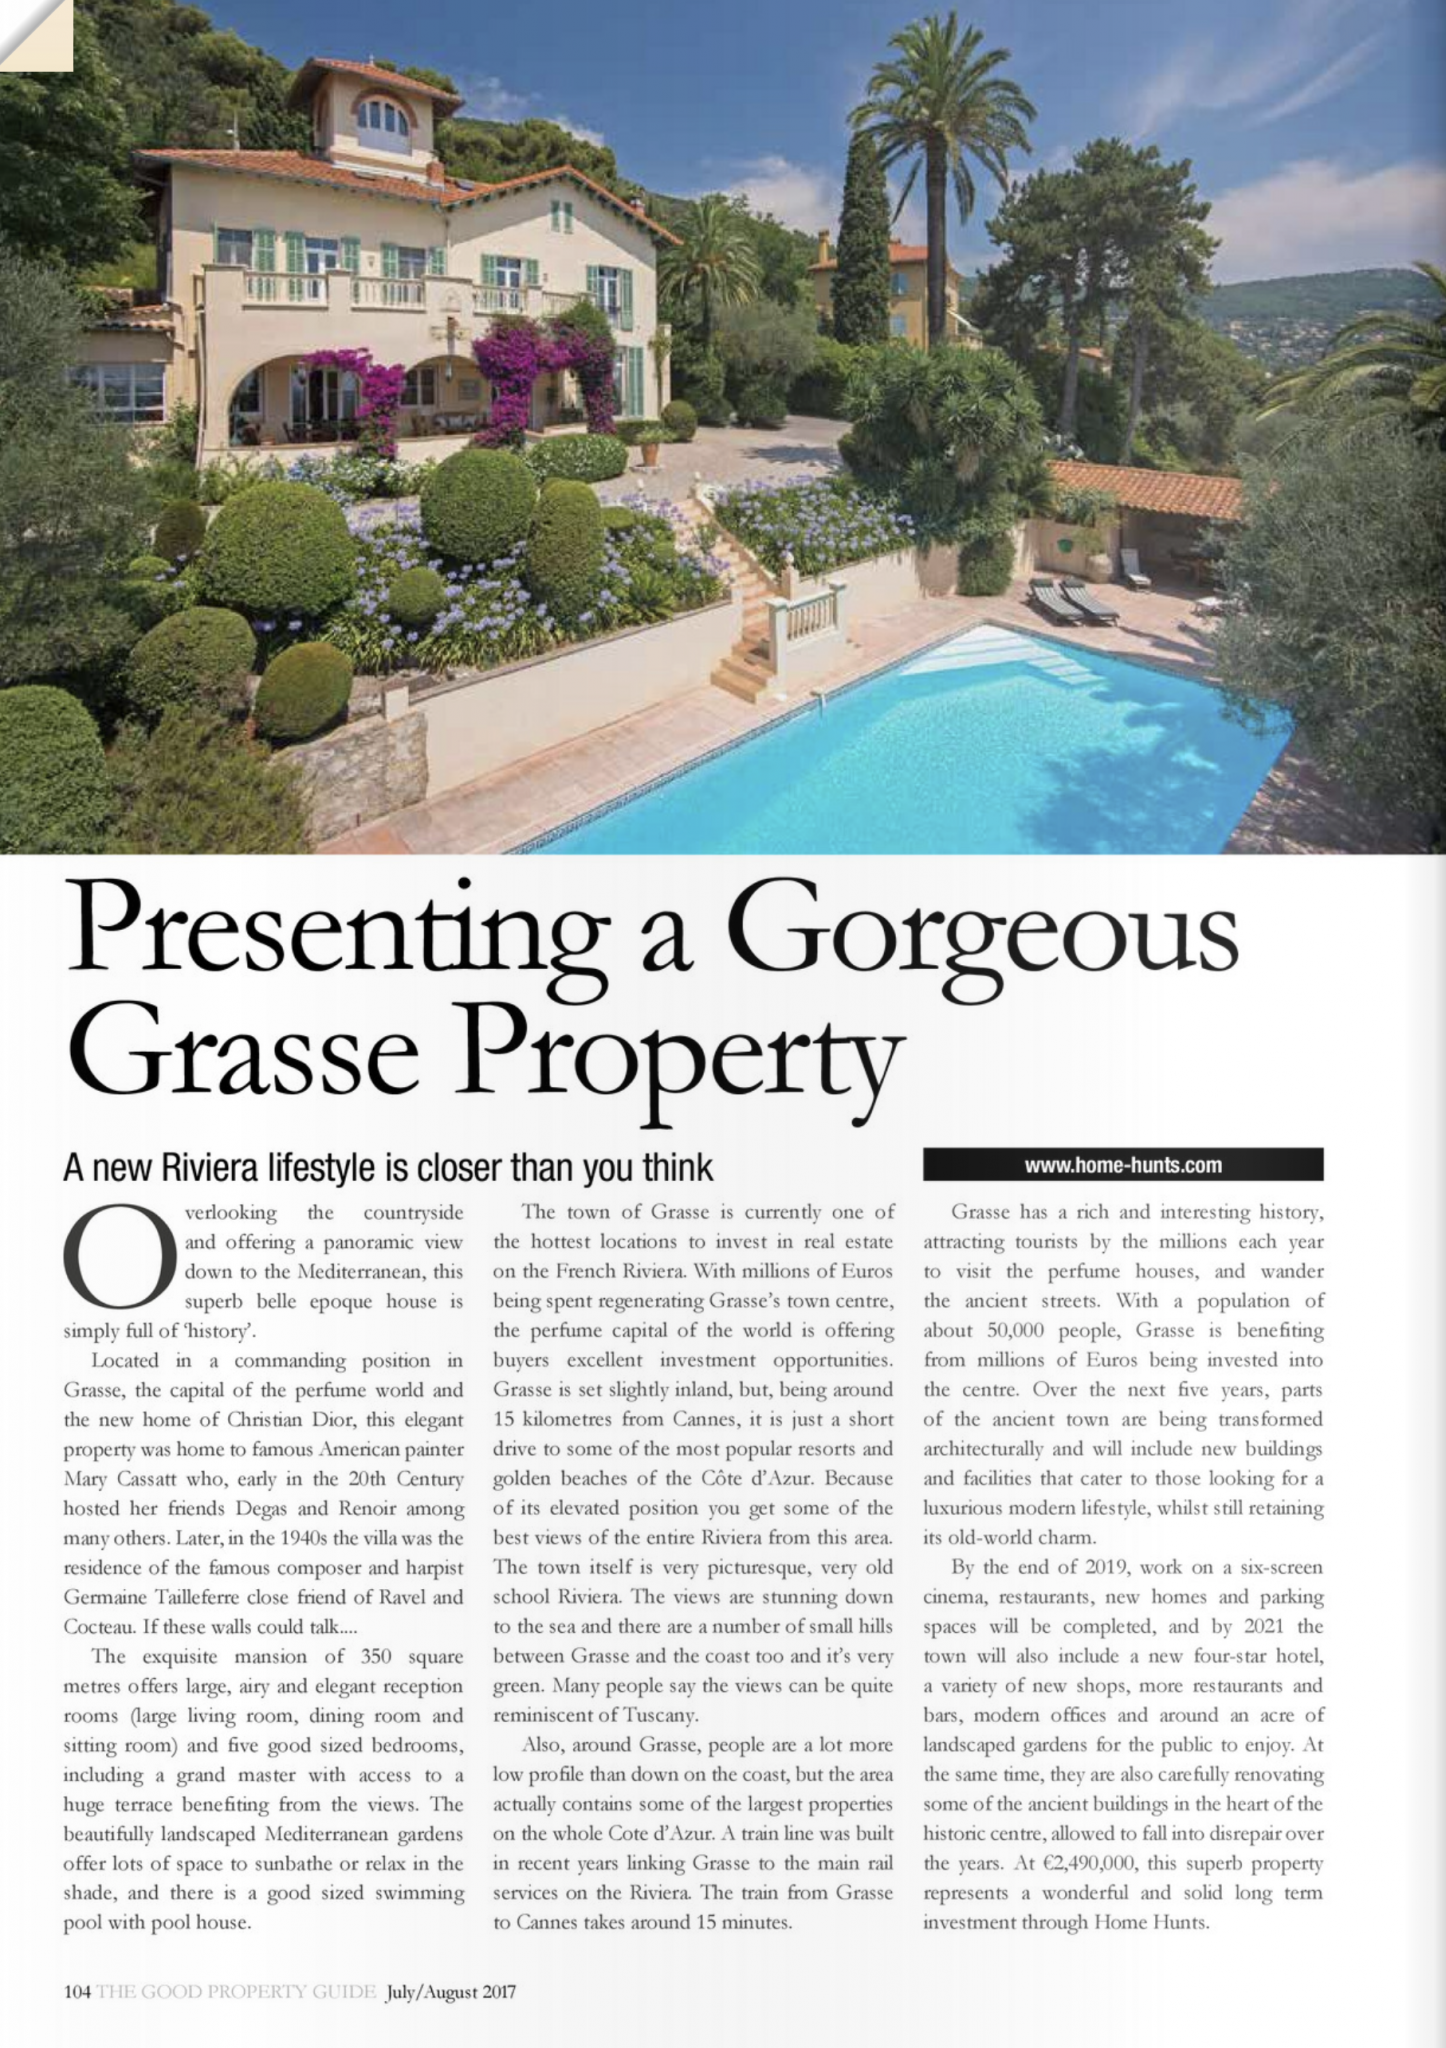 The Good Property Guide – Beautiful property in Grasse